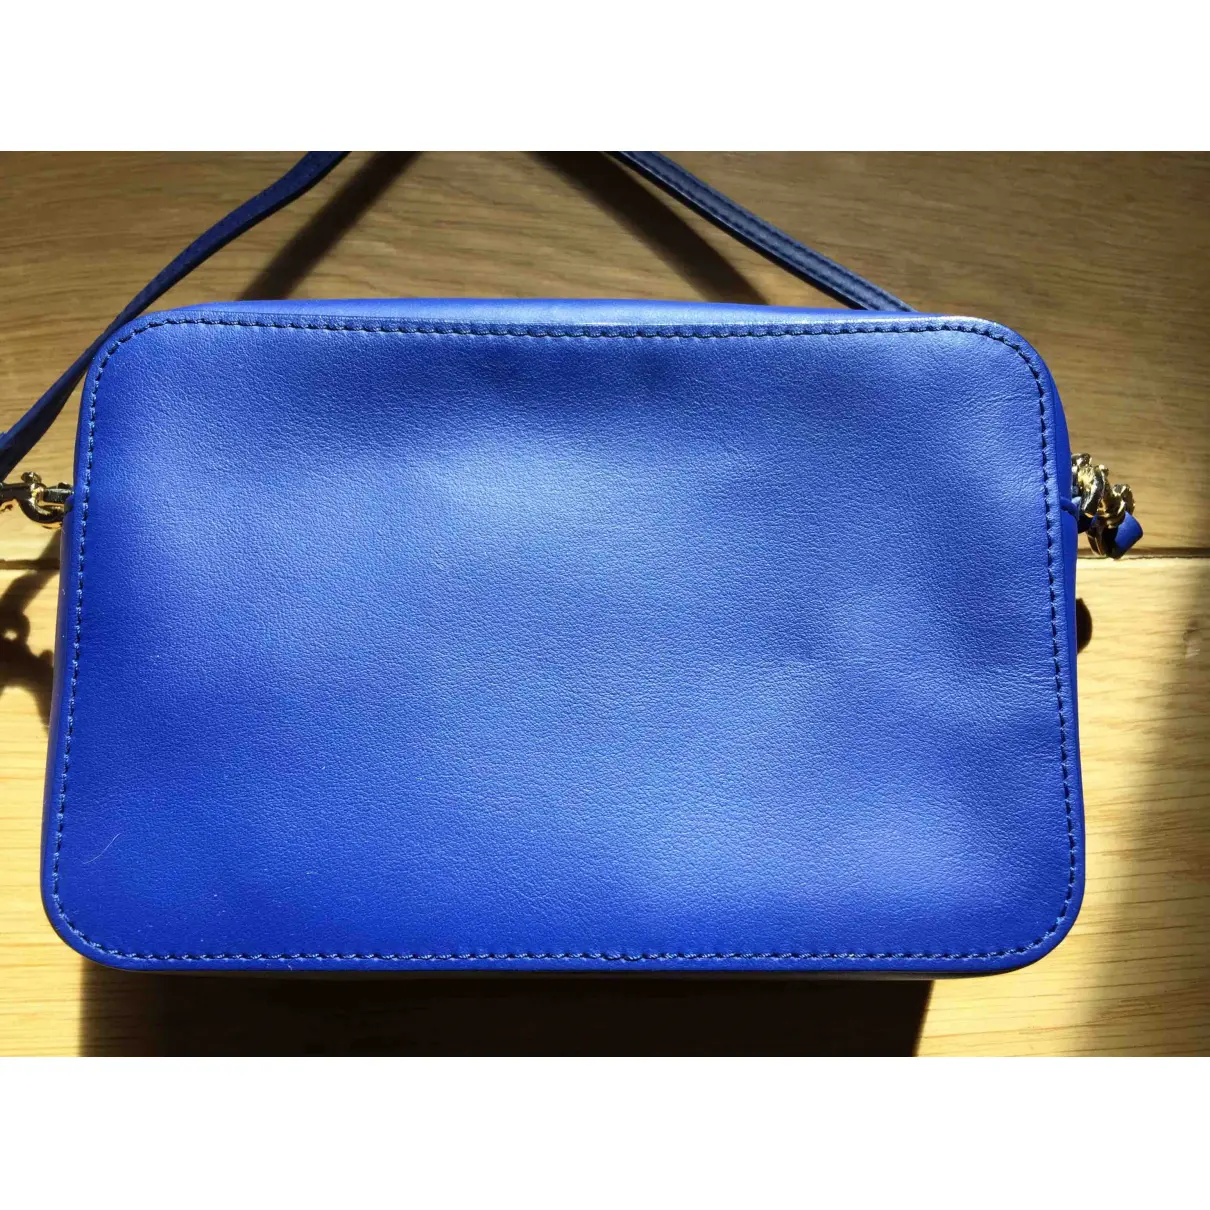 Blossom leather clutch bag Mulberry